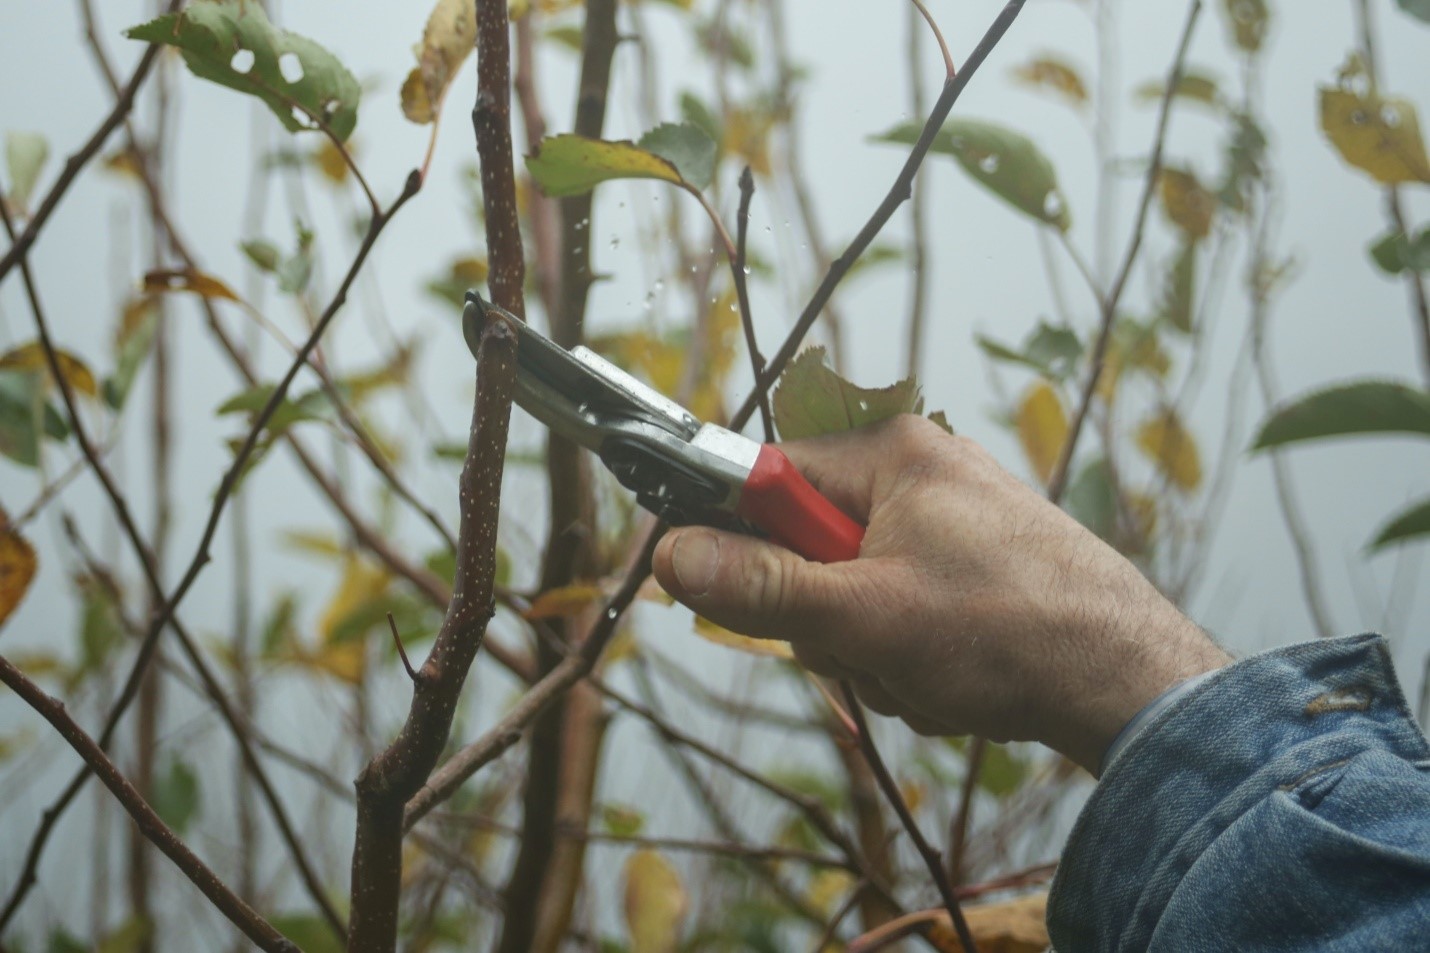 Person holding hand clippers for pruning